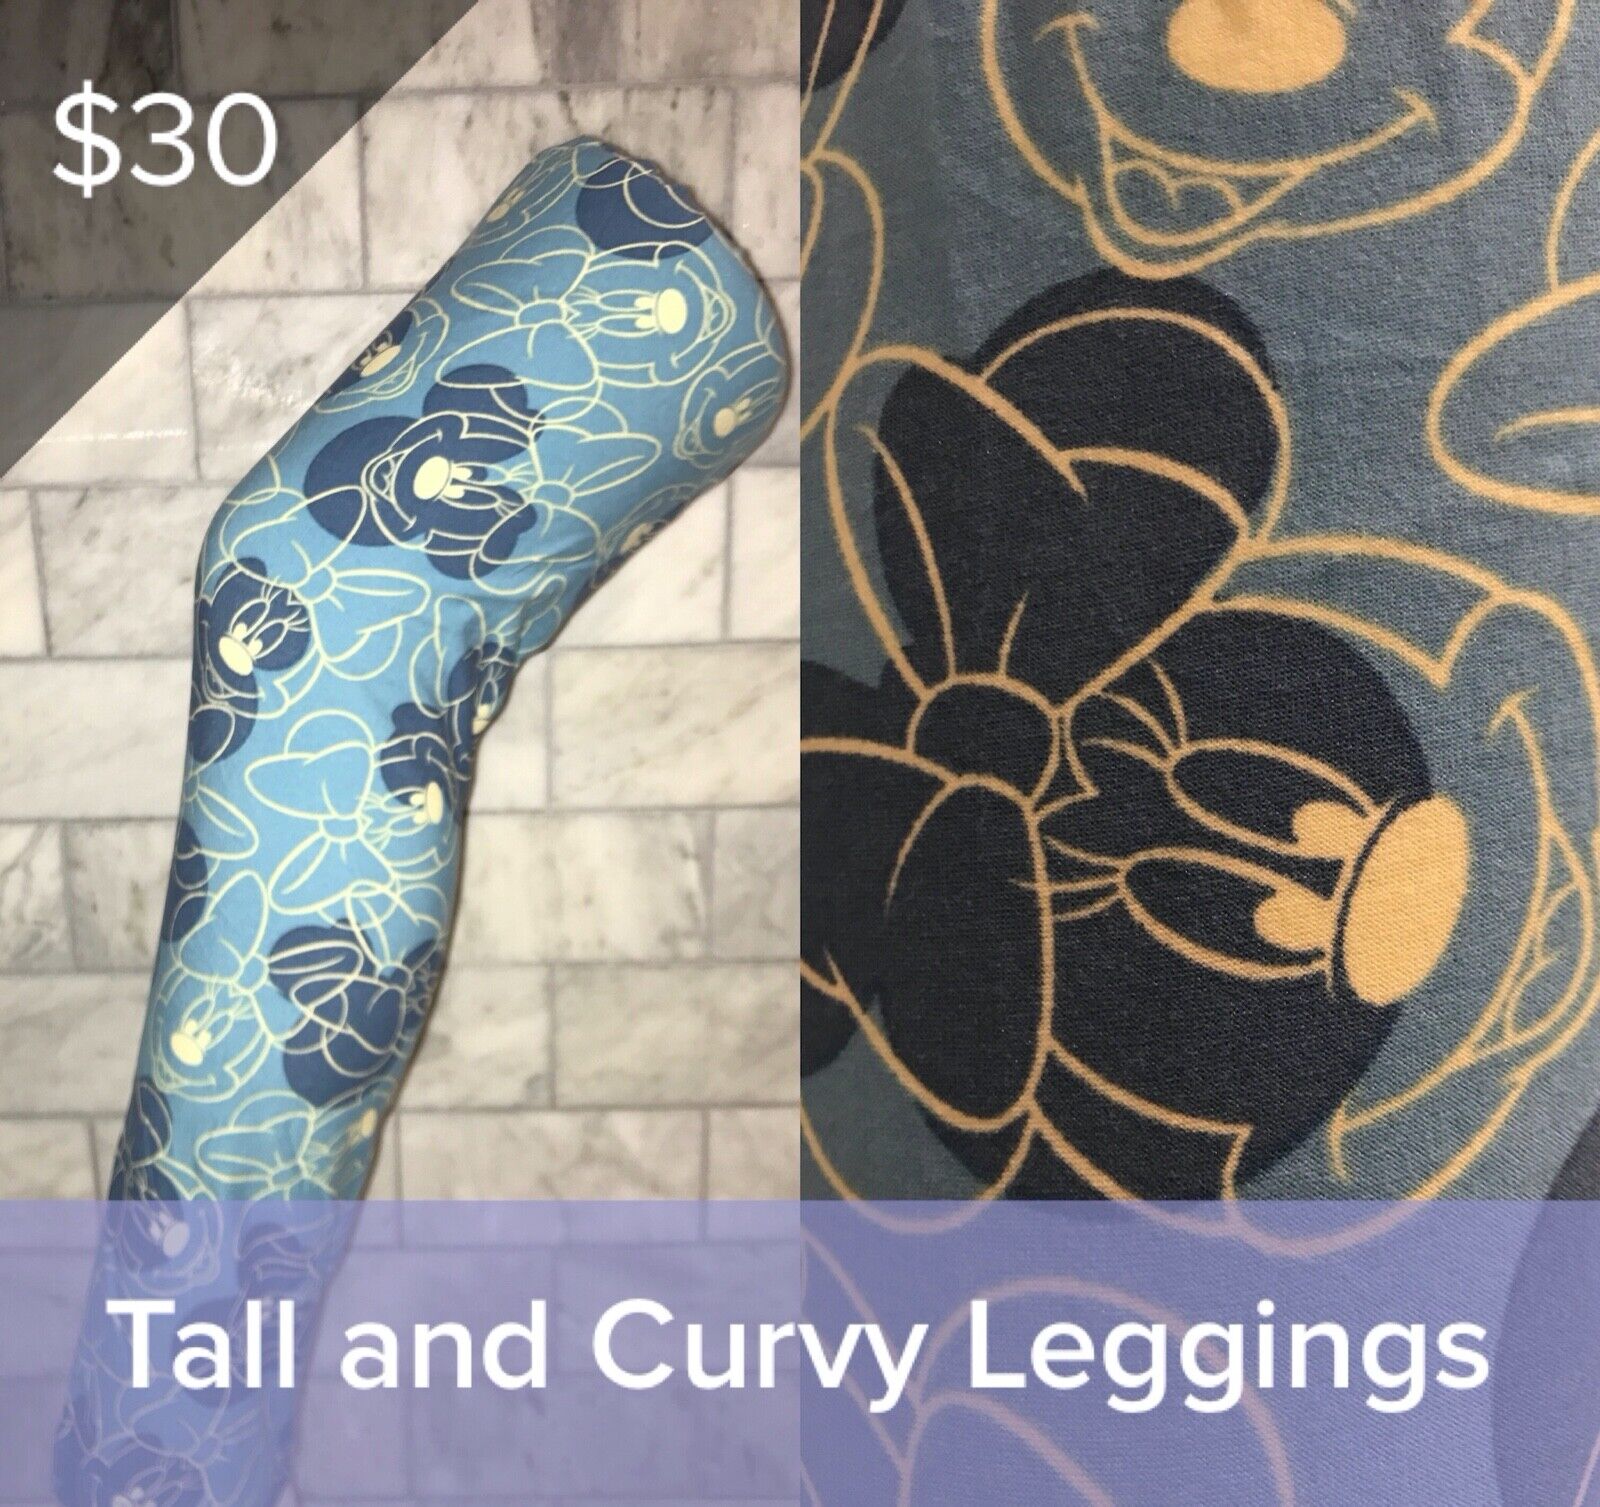 LuLaRoe Tall and Curvy T&C leggings brand new BN Vintage 2017 DISNEY collection